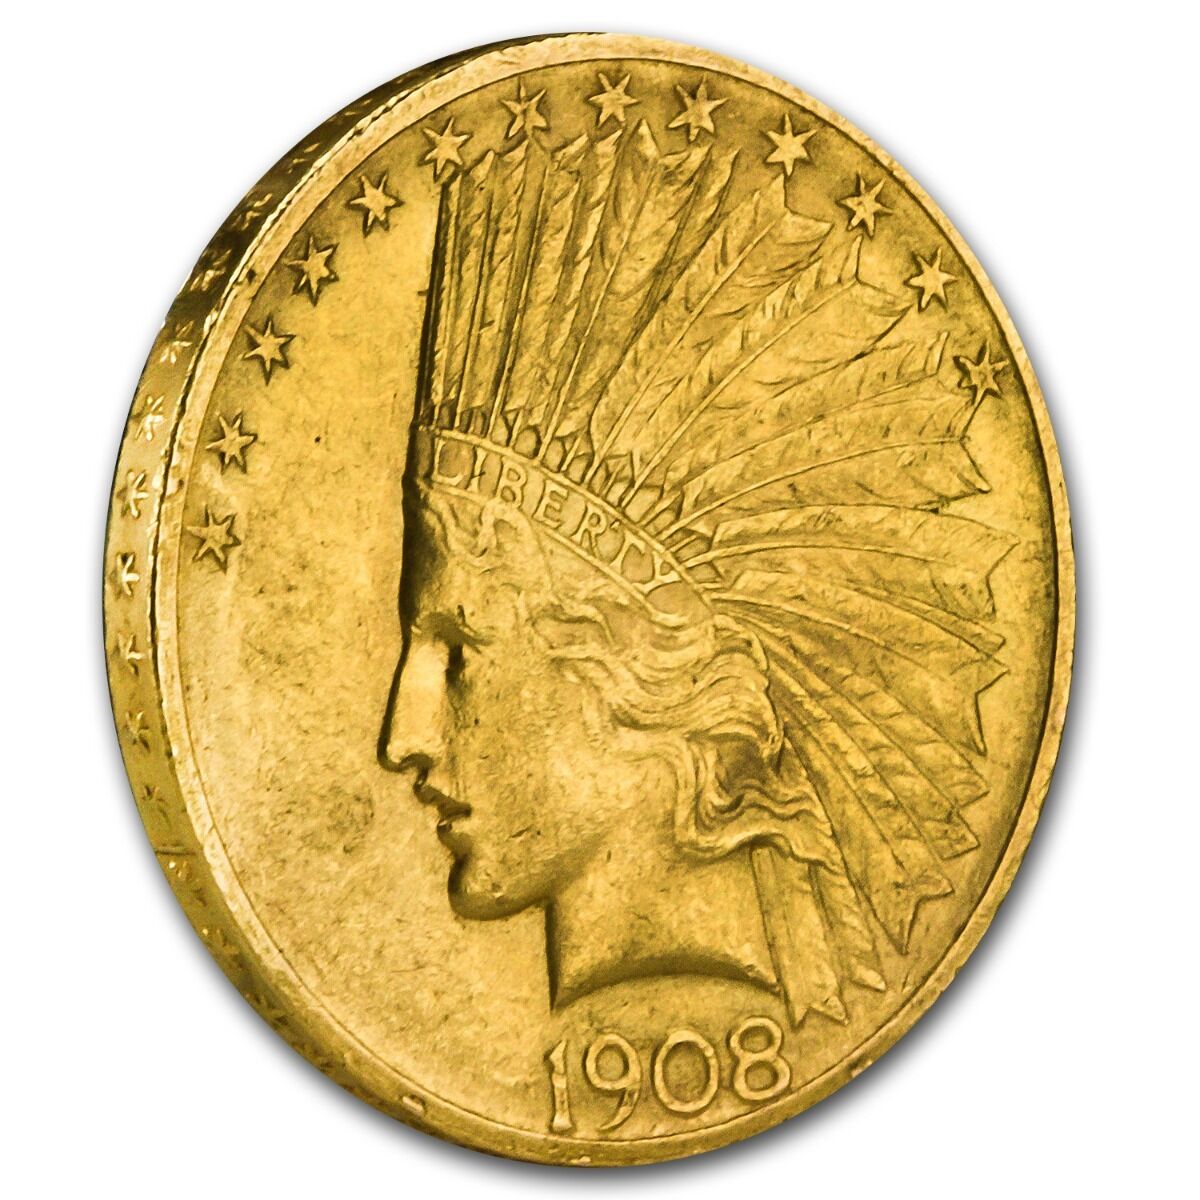 $10 Indian Gold Eagle Pre-33 Gold Coin Random Year Almost Uncirculated